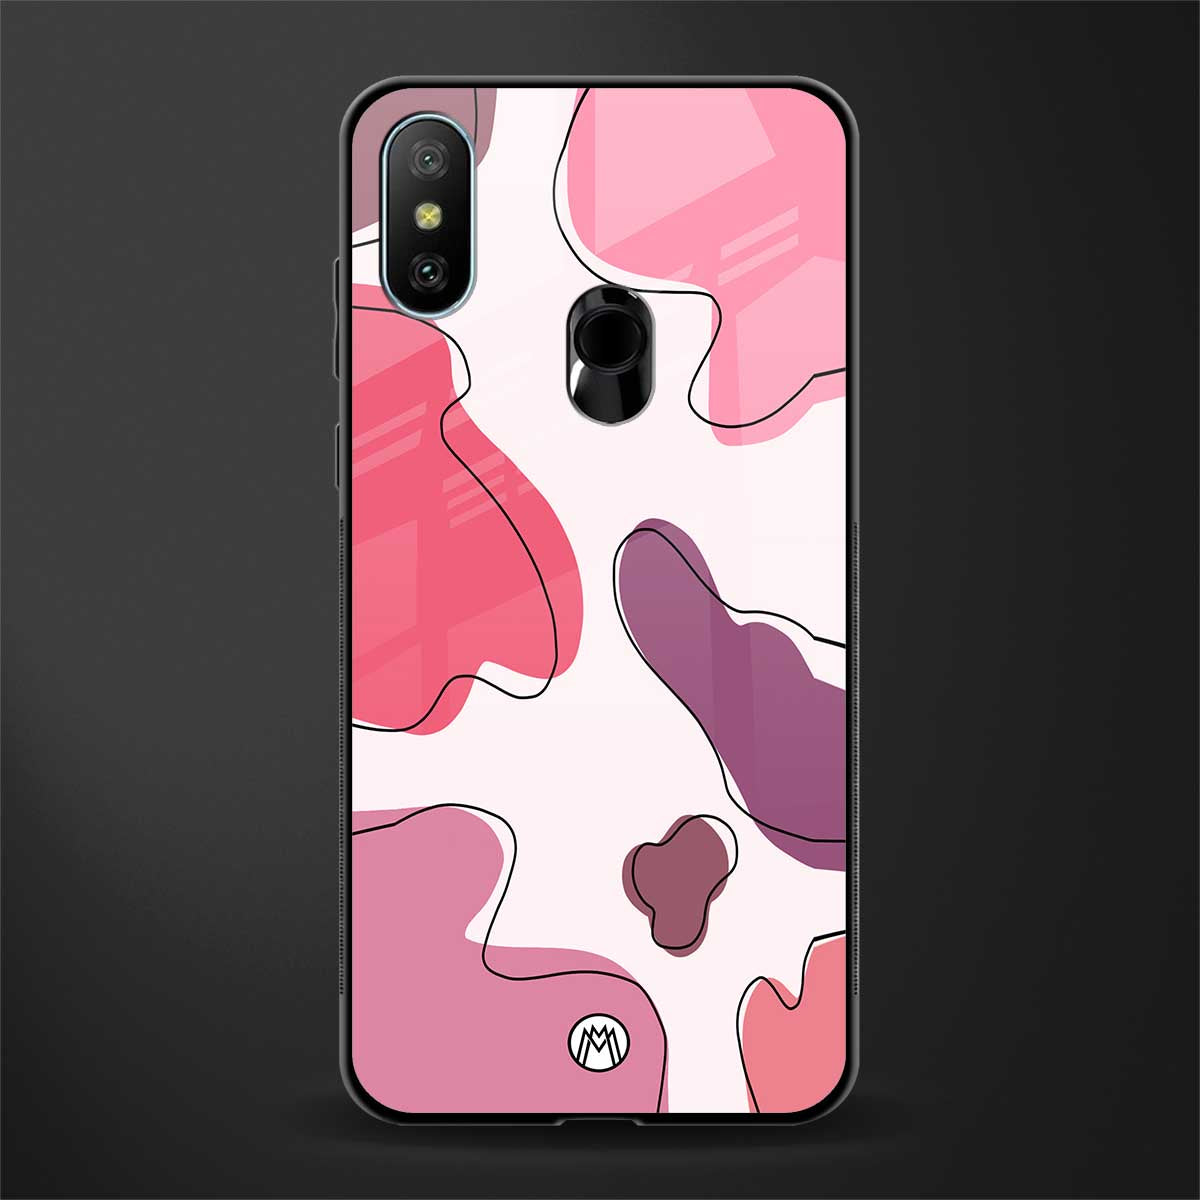 cotton candy taffy edition glass case for redmi 6 pro image